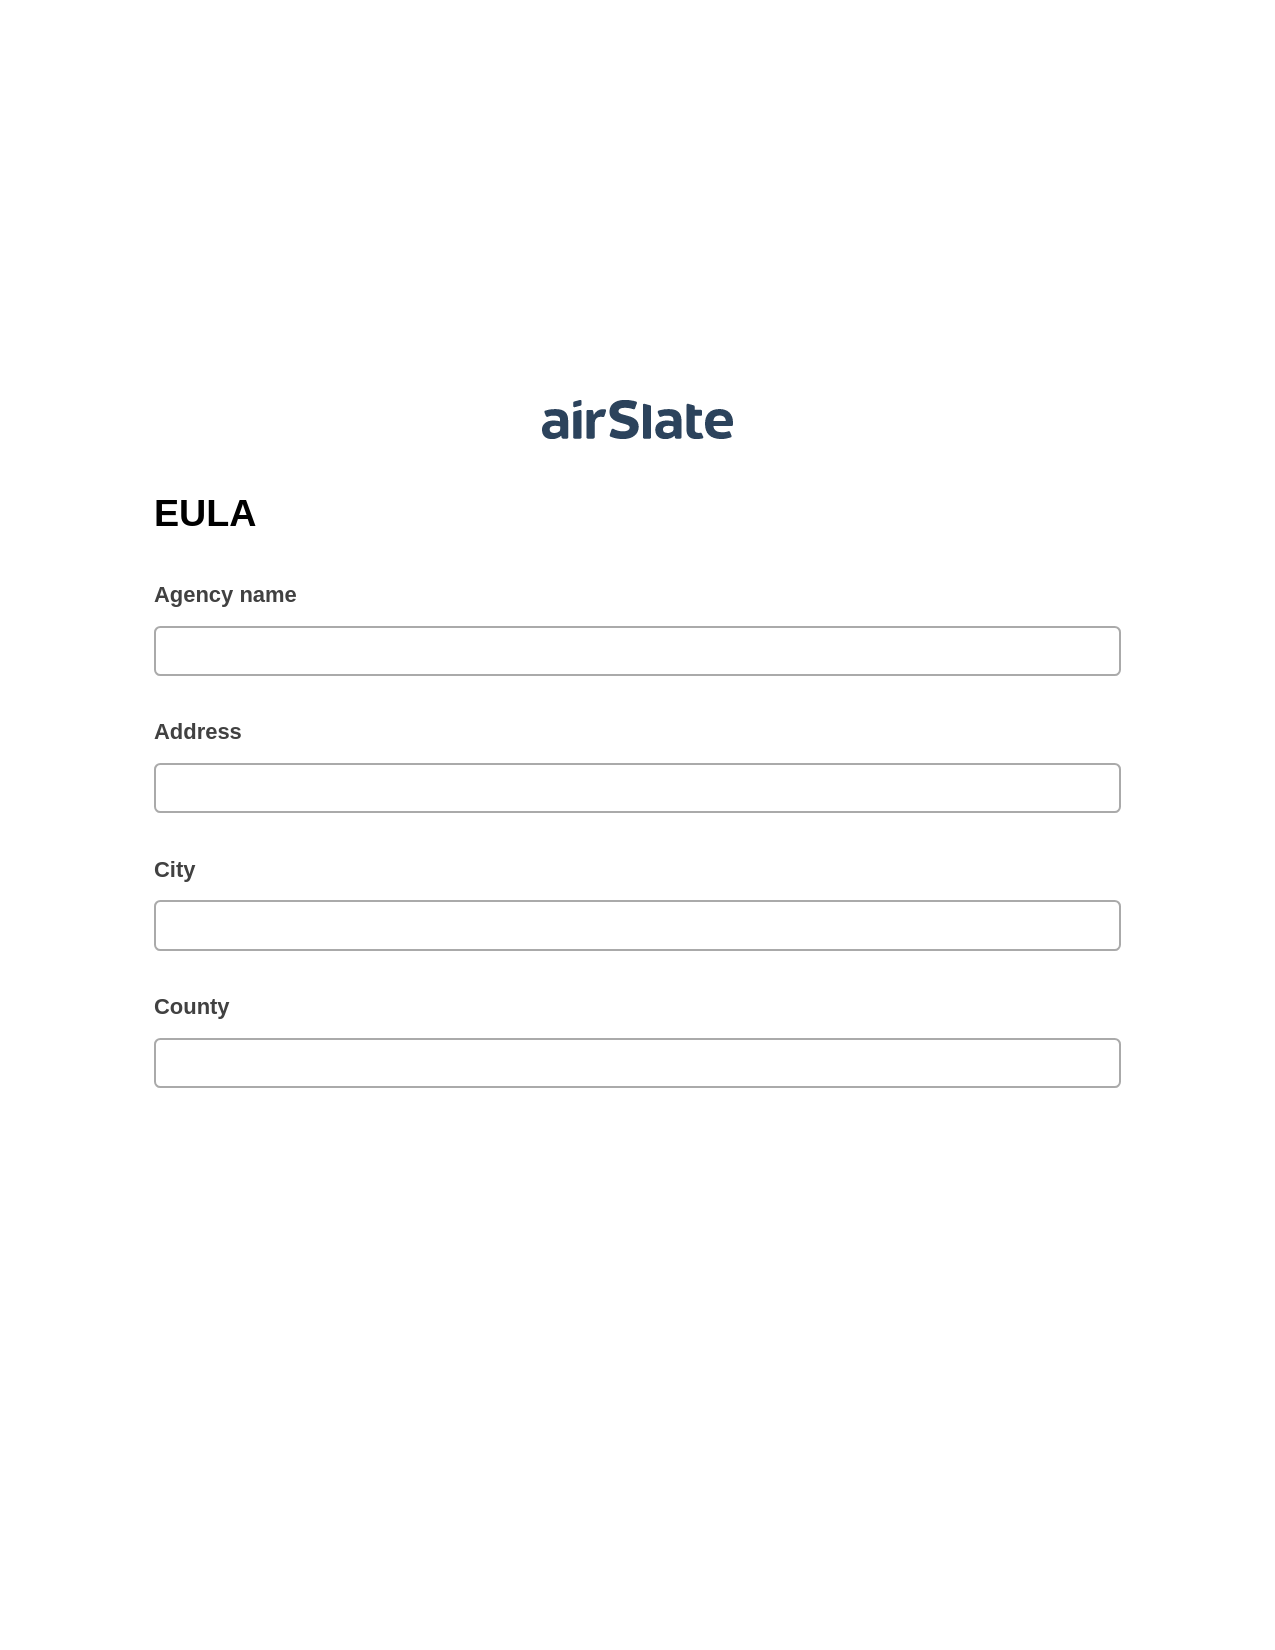 EULA Pre-fill Slate from MS Dynamics 365 Records Bot, Webhook Bot, Export to Google Sheet Bot